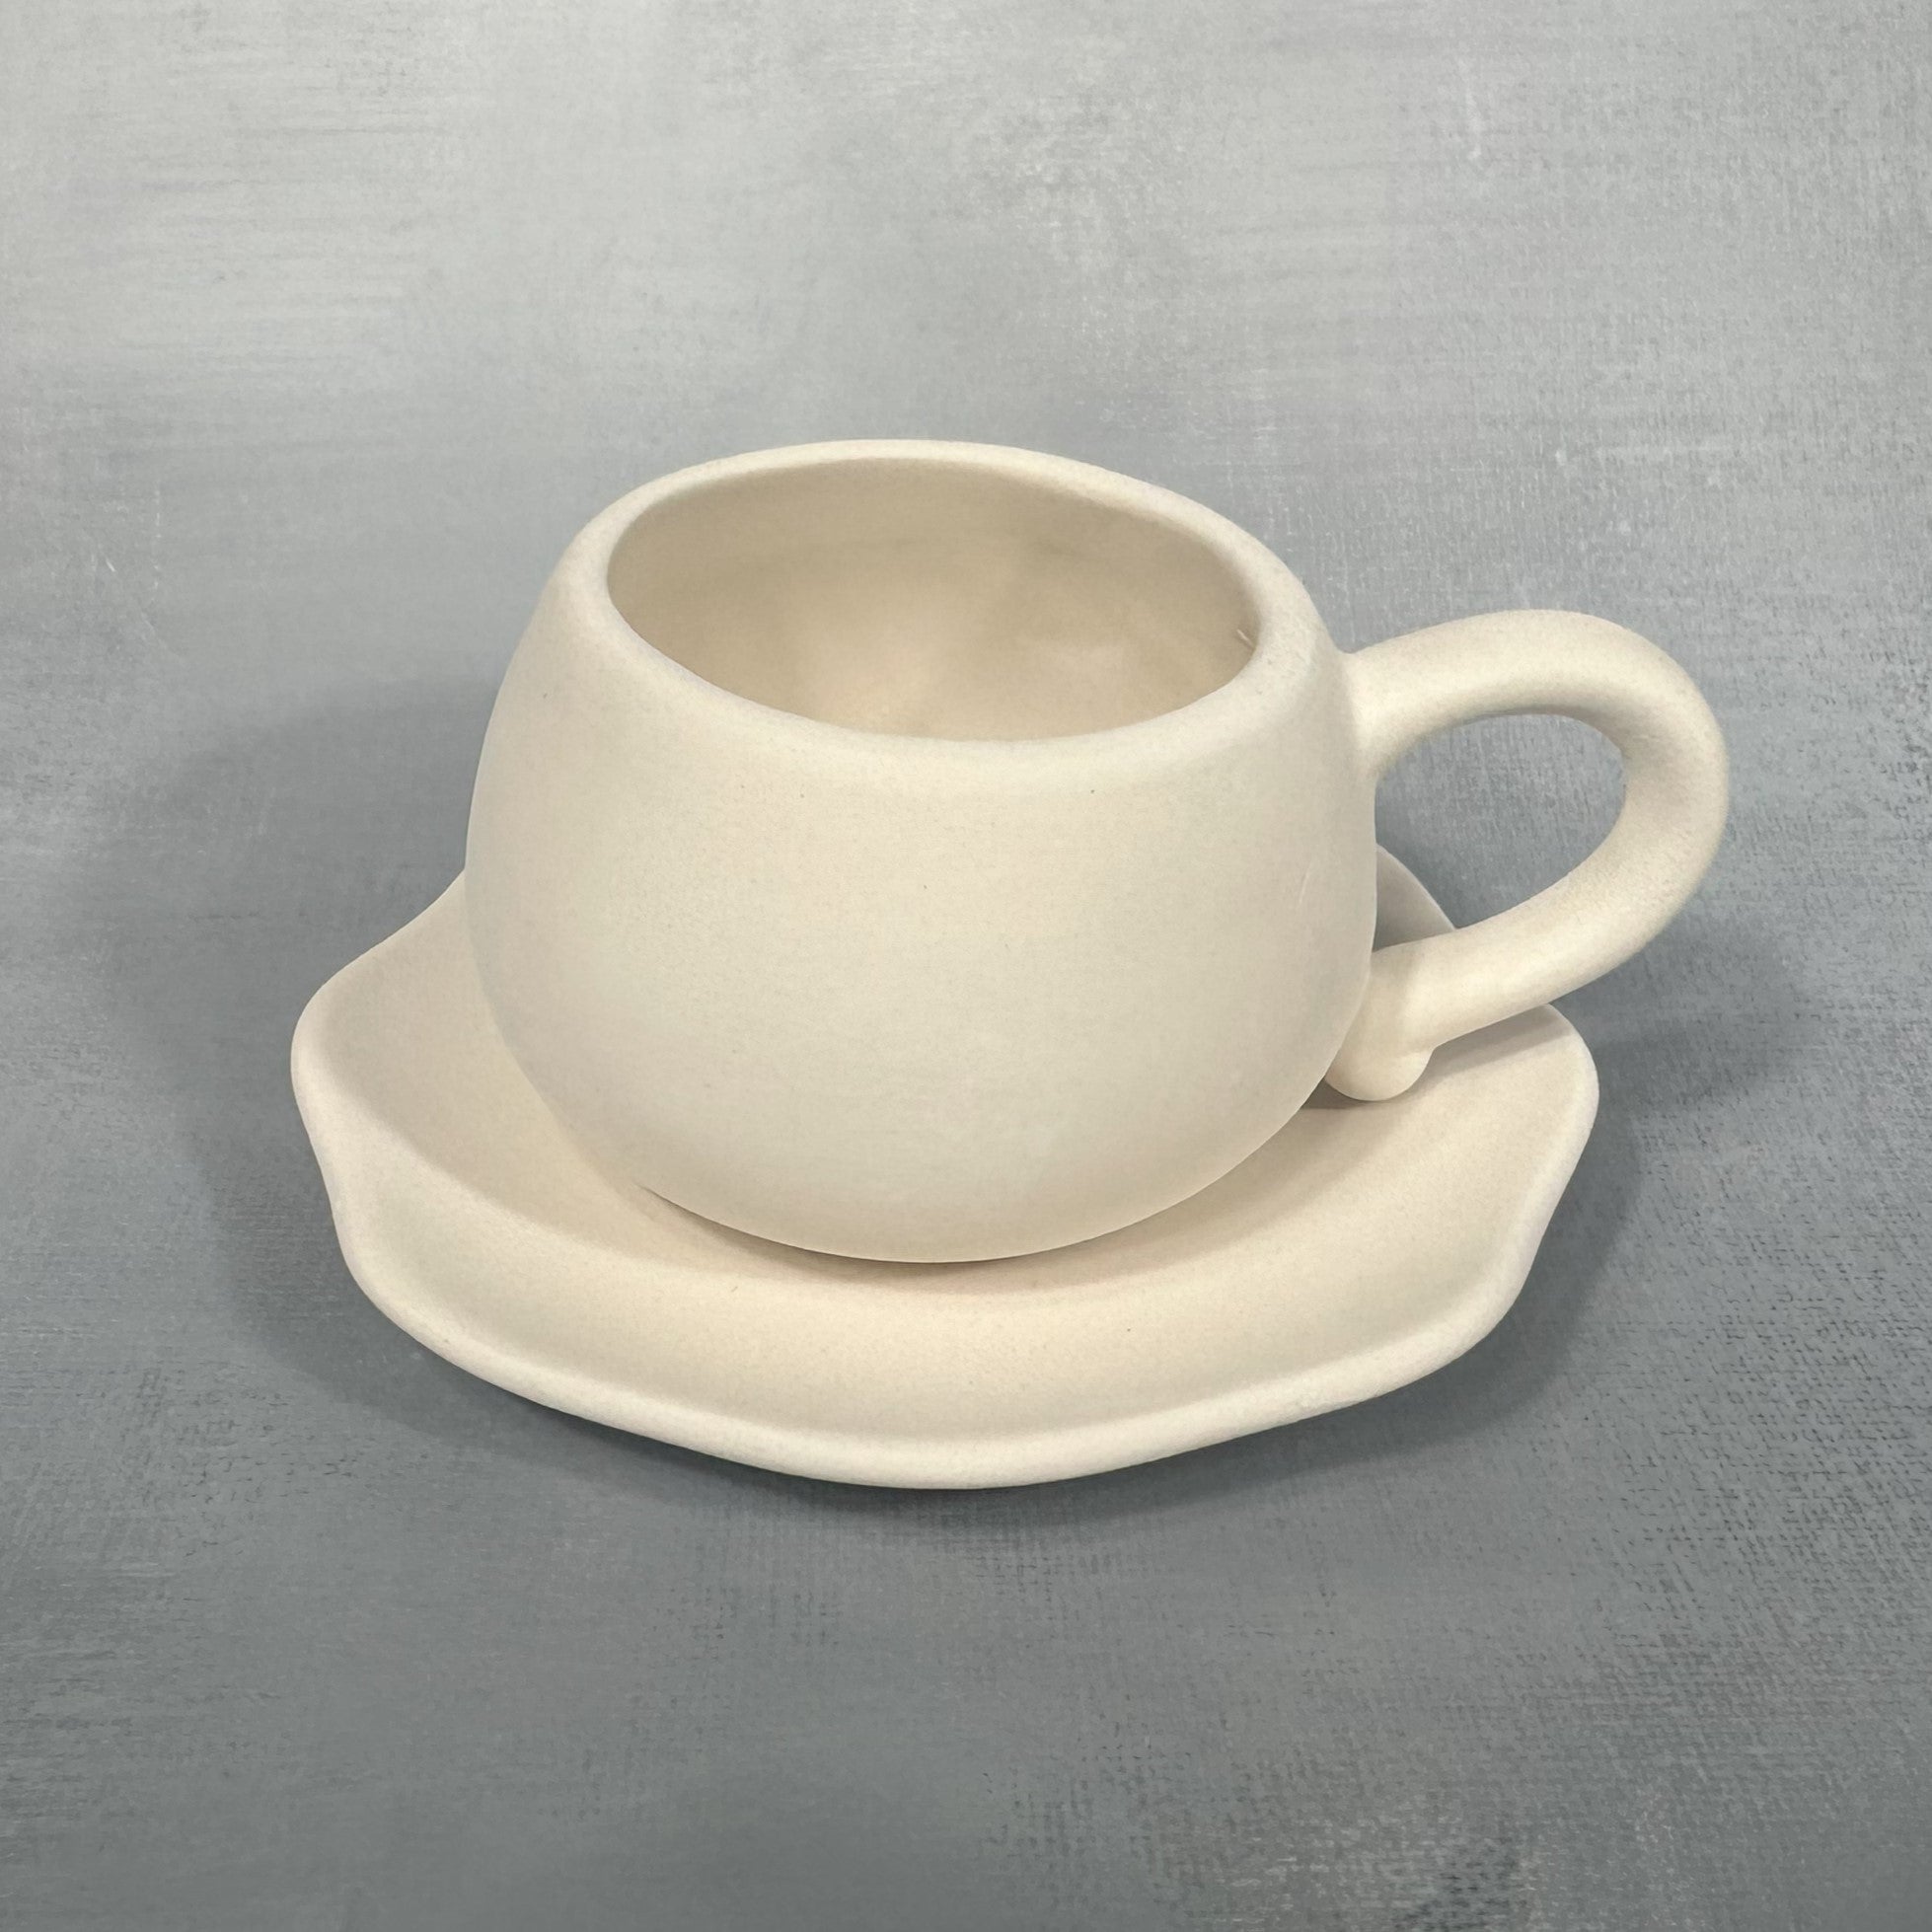 2 oz. Child's Cup & Saucer